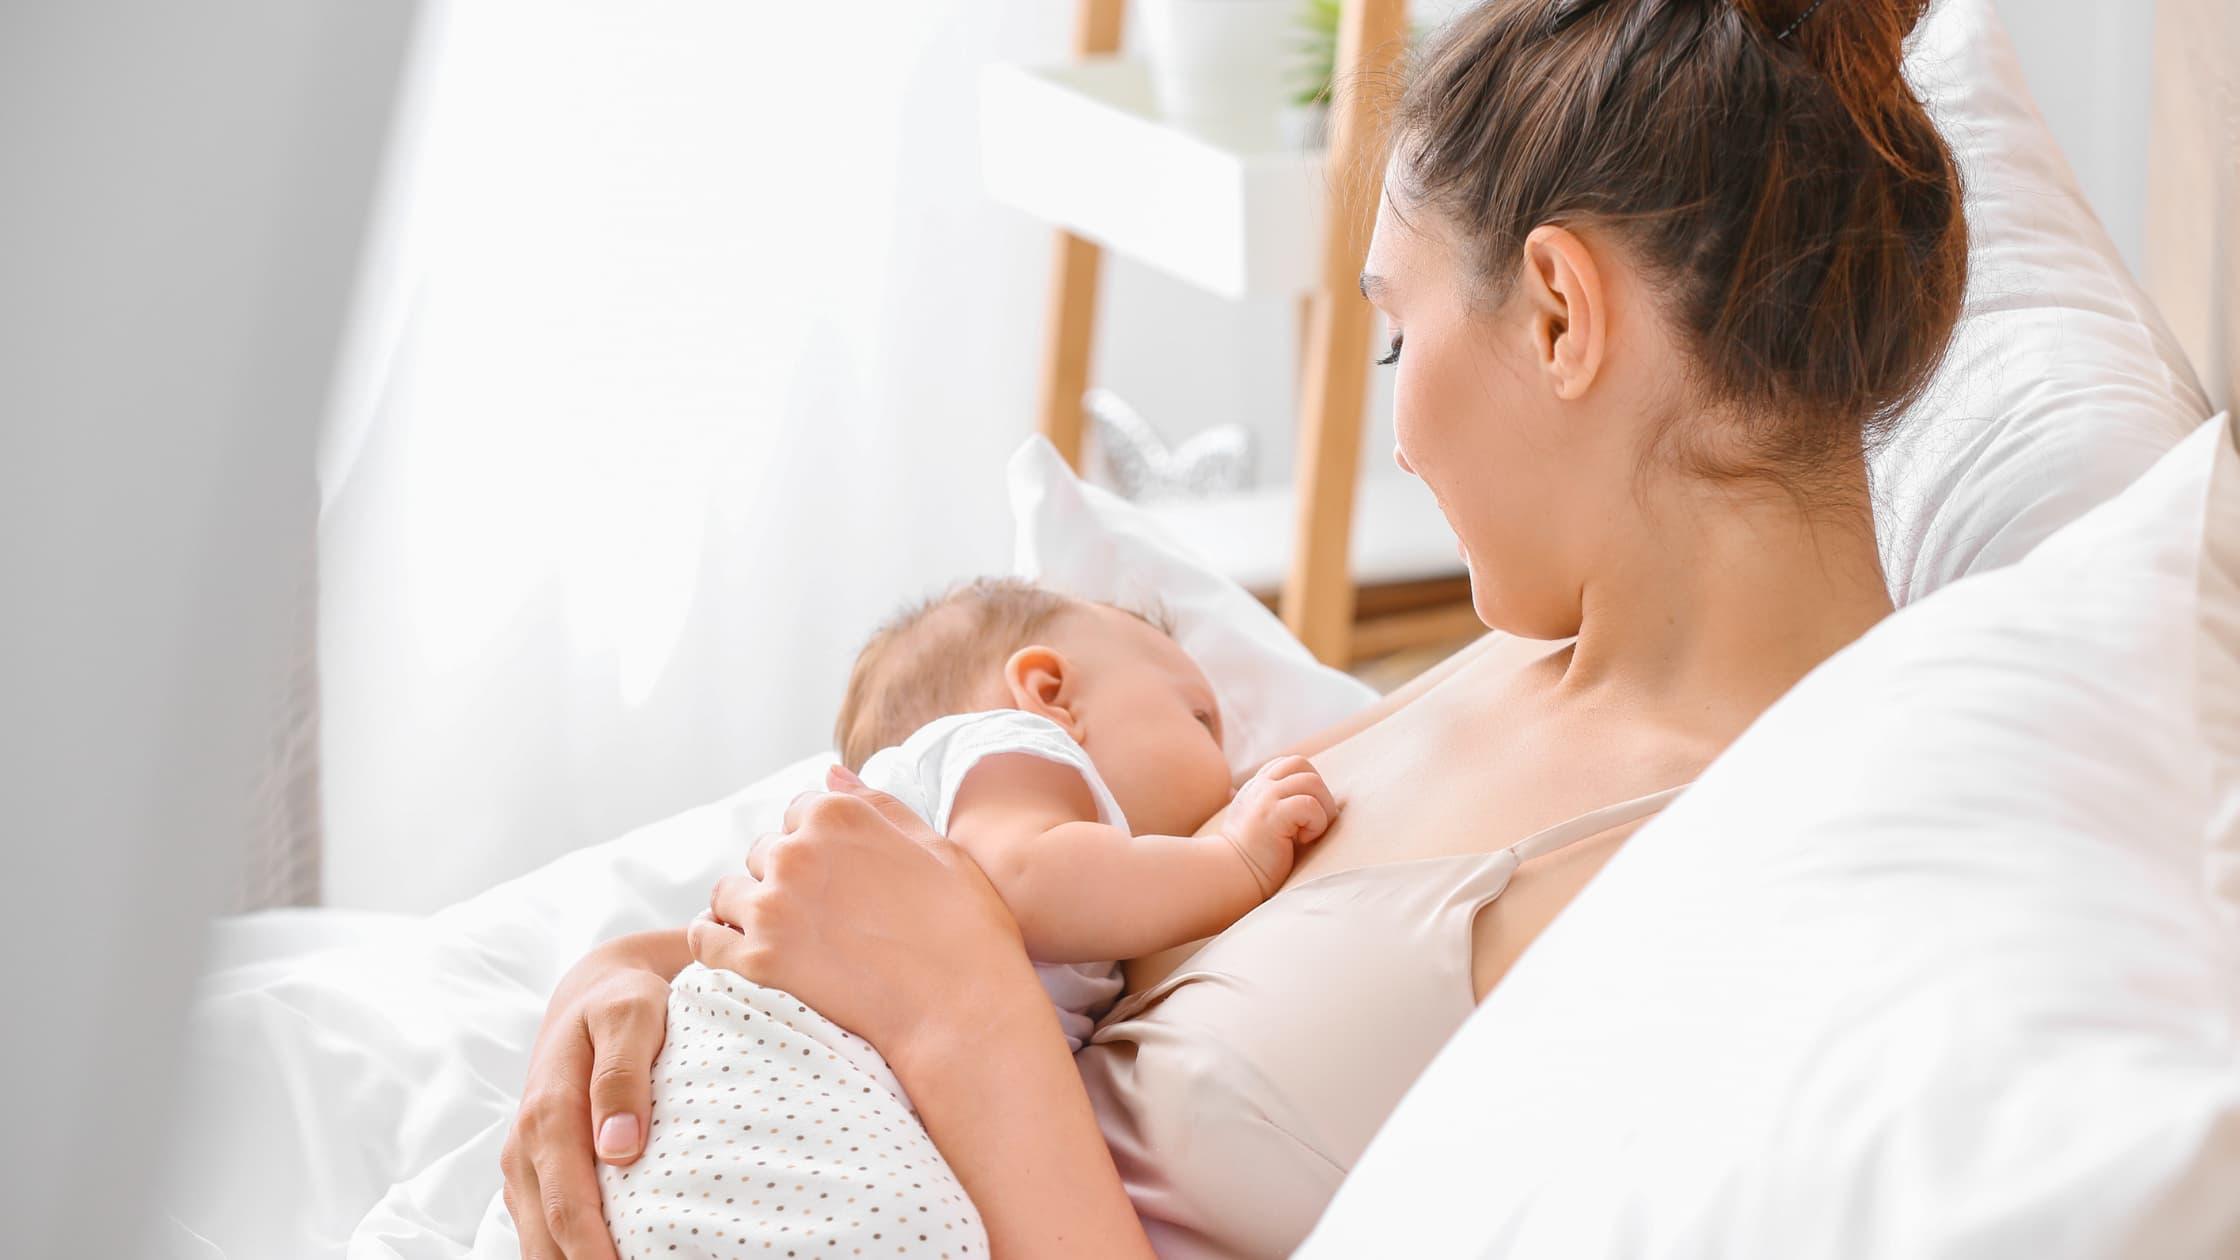 Breastfeeding Your Newborn: Common Challenges and Solutions - hegen.us